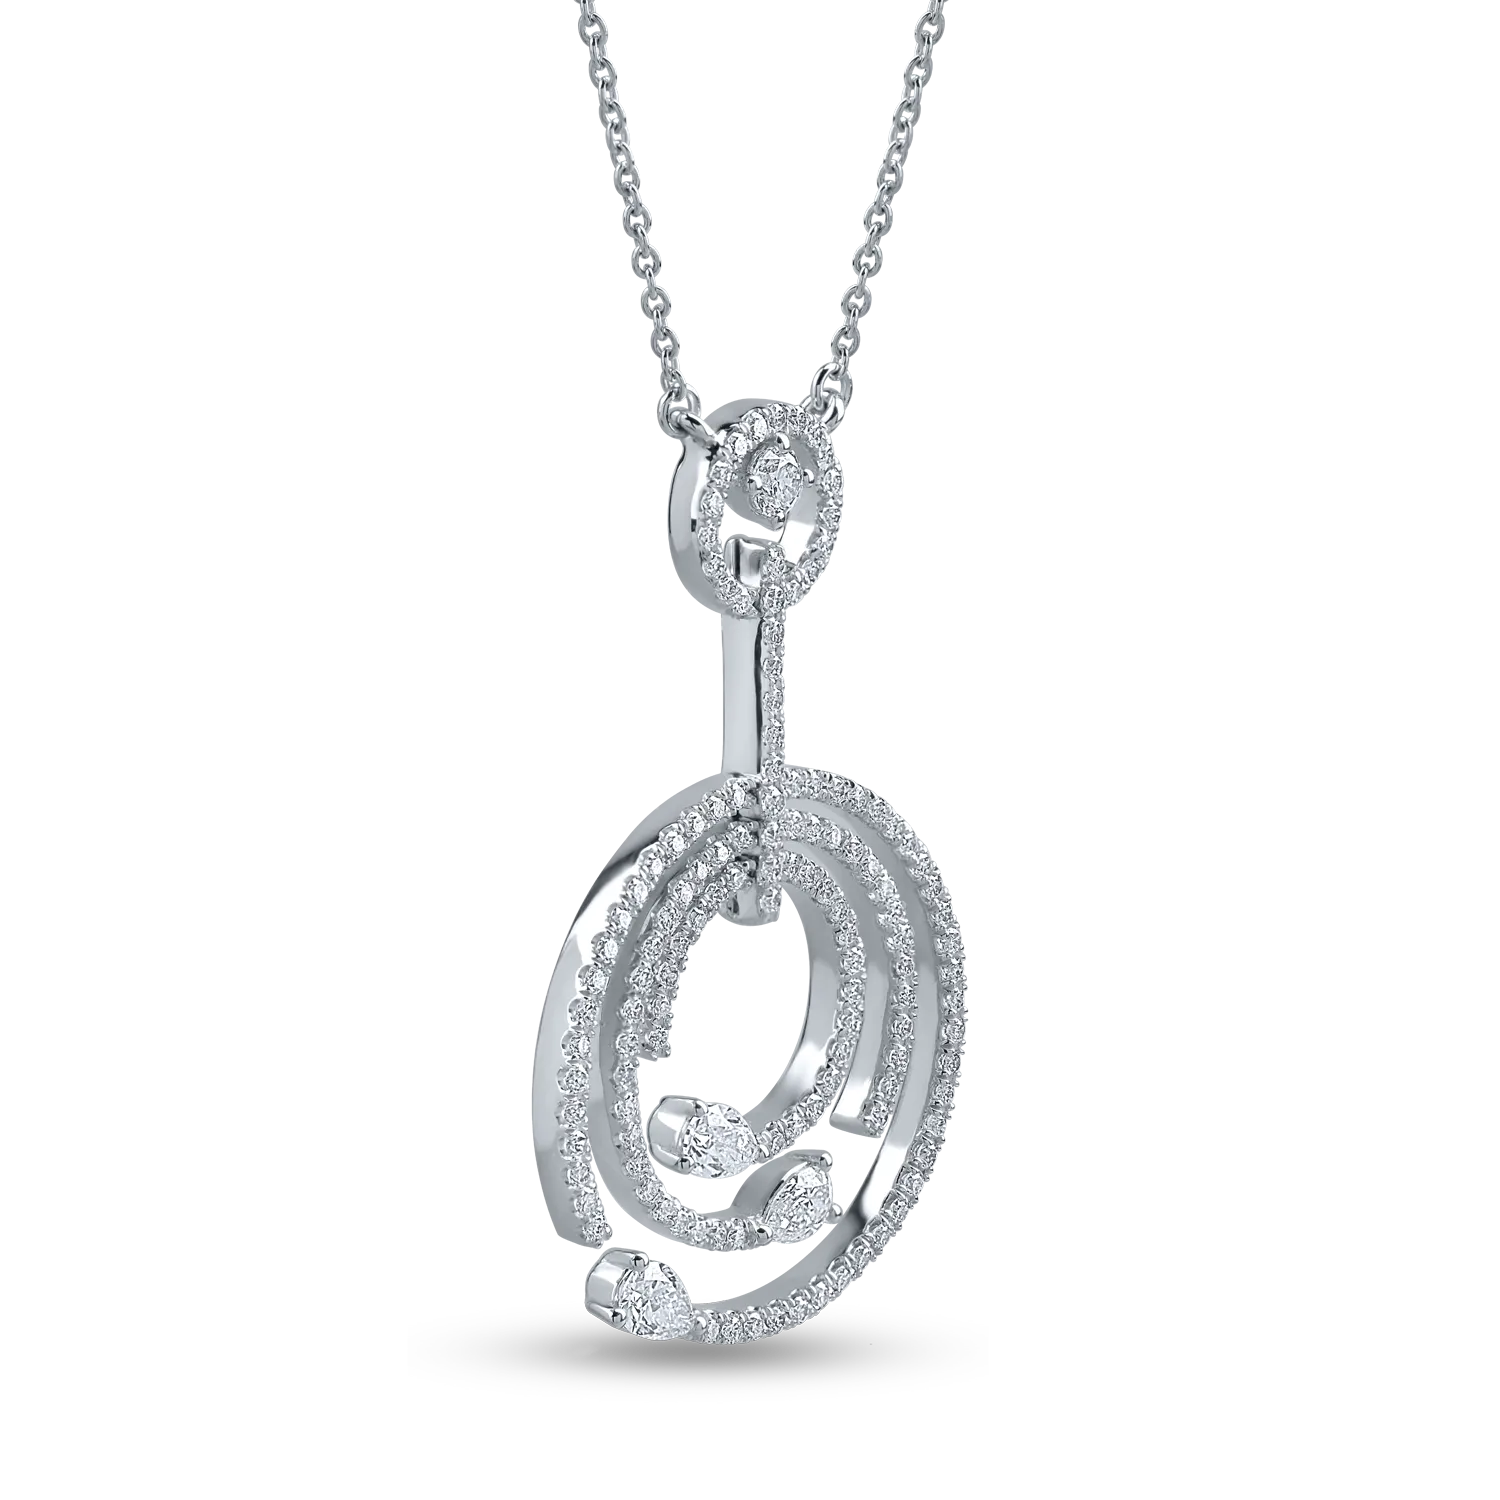 White gold pendant necklace with 1.2ct diamonds